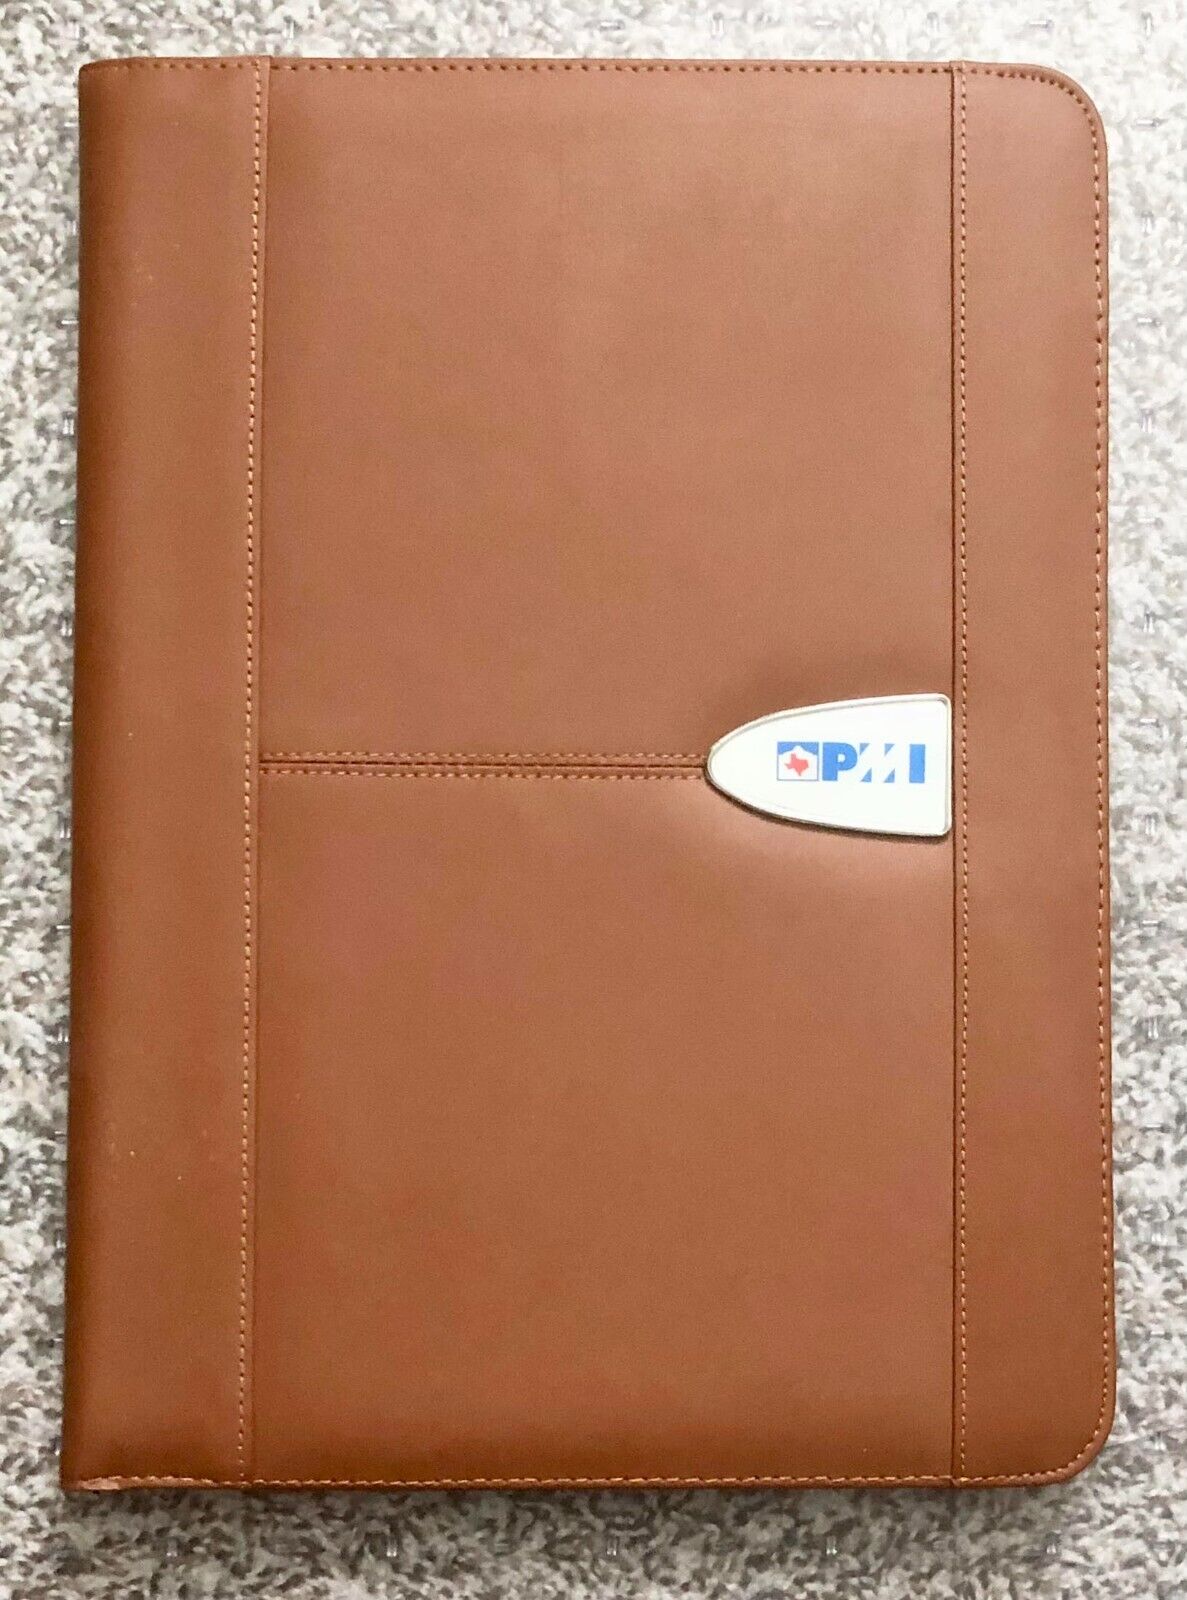 📝    Sovrano Pmi Padfolio Brown Faux Leather W/ Paper, Pockets, Pen Holder